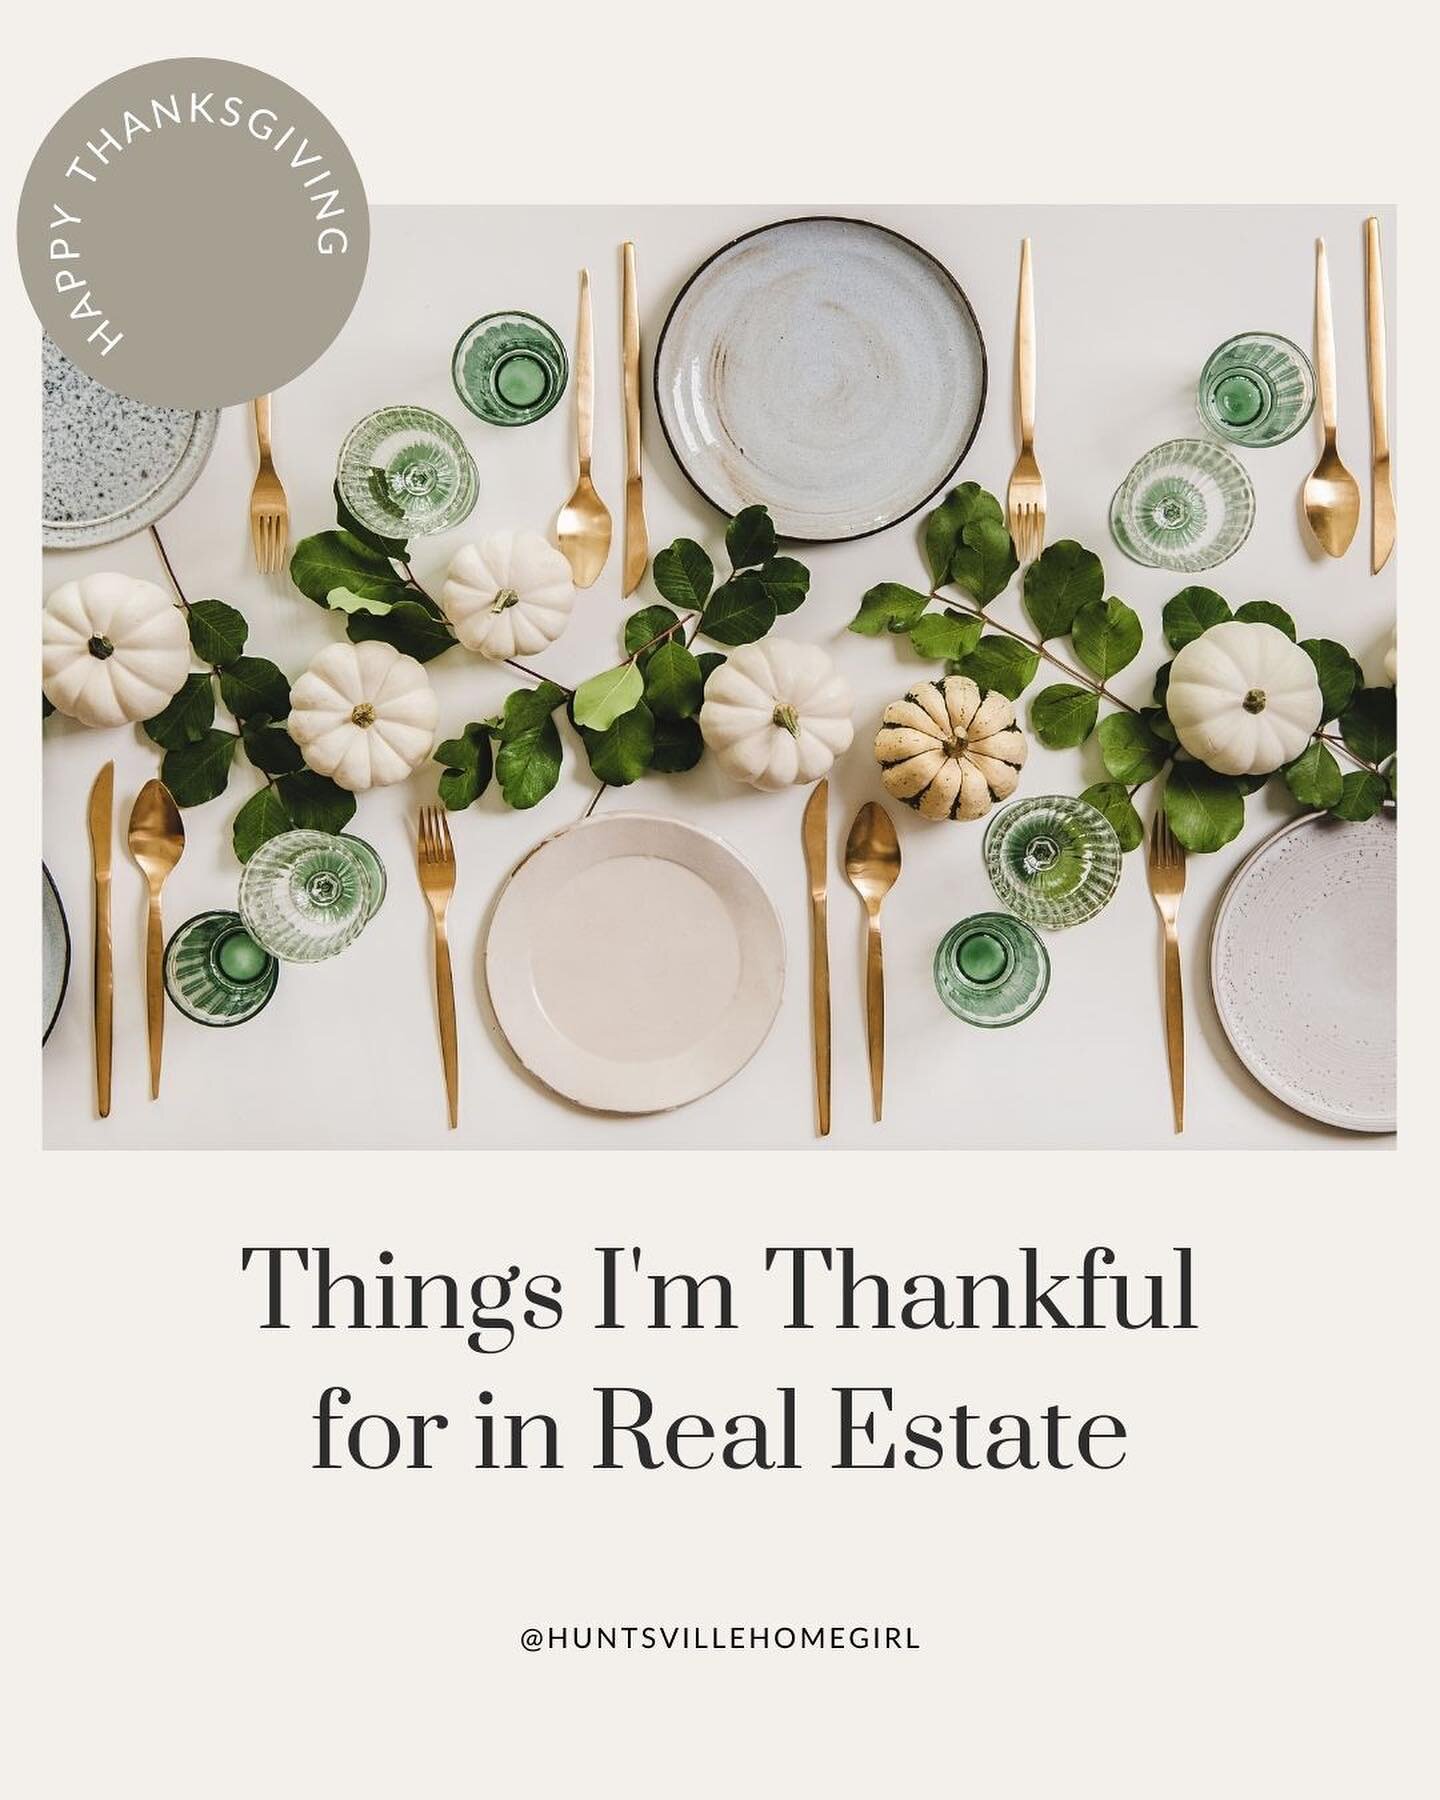 I have a lot to be thankful for 🍂. I'm grateful for my real estate journey and the opportunity to serve my clients. But, of course, clients who have turned into friends have been the greatest blessing. 🫶

#huntsvillerealtor #realtorlife #huntsville